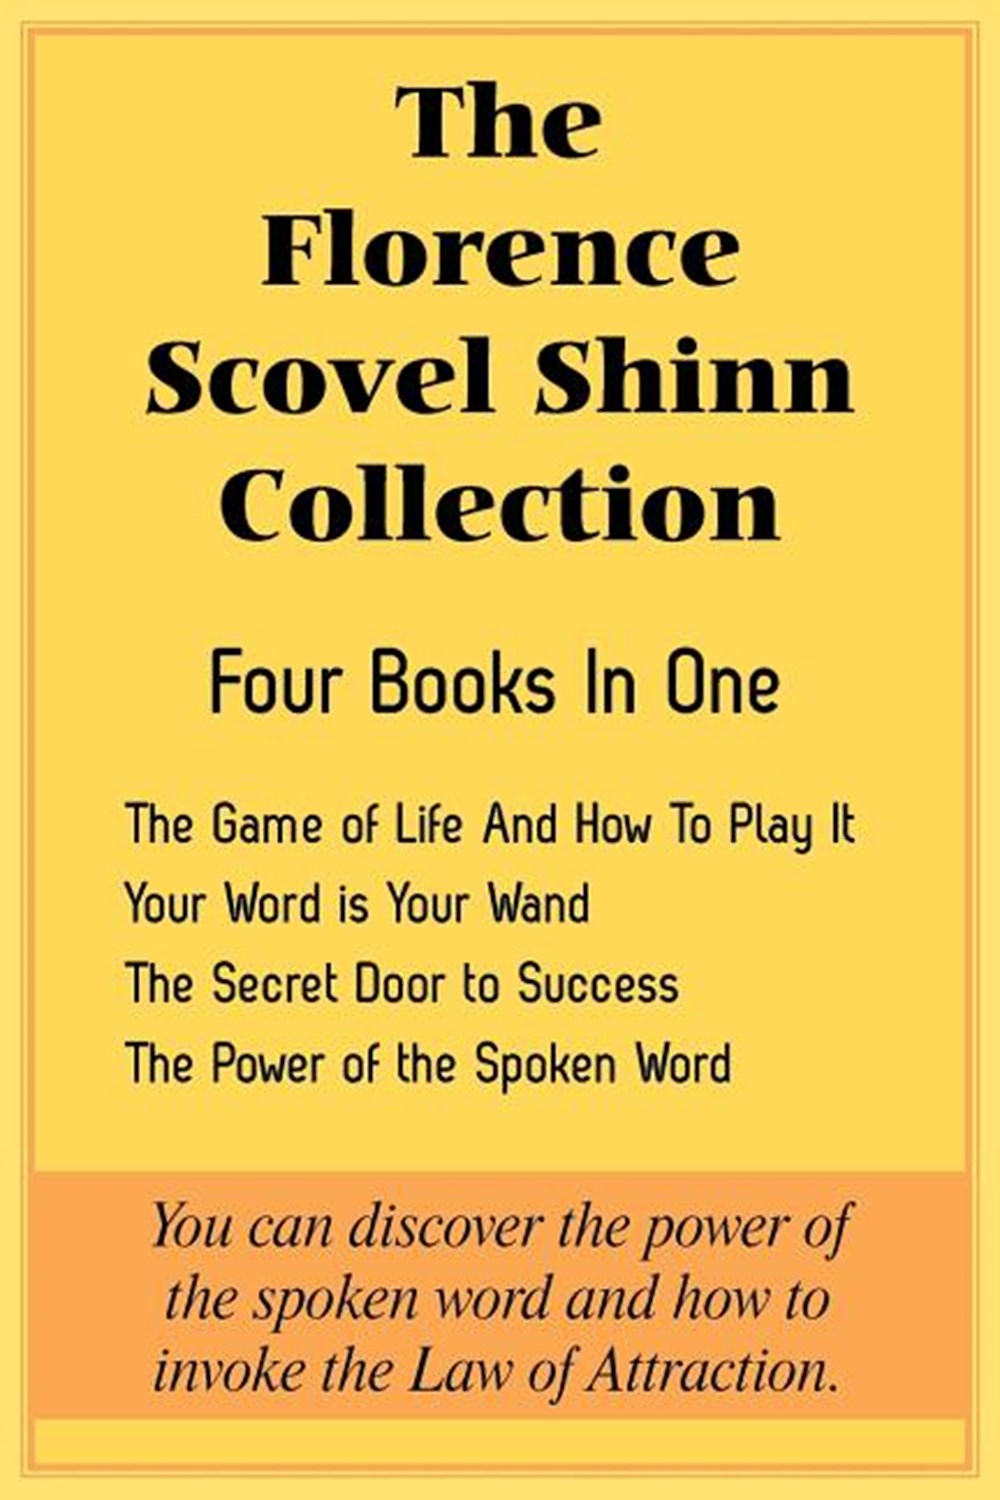 Florence Scovel Shinn Collection The Game of Life And How To Play It, Your Word is Your Wand, The Se